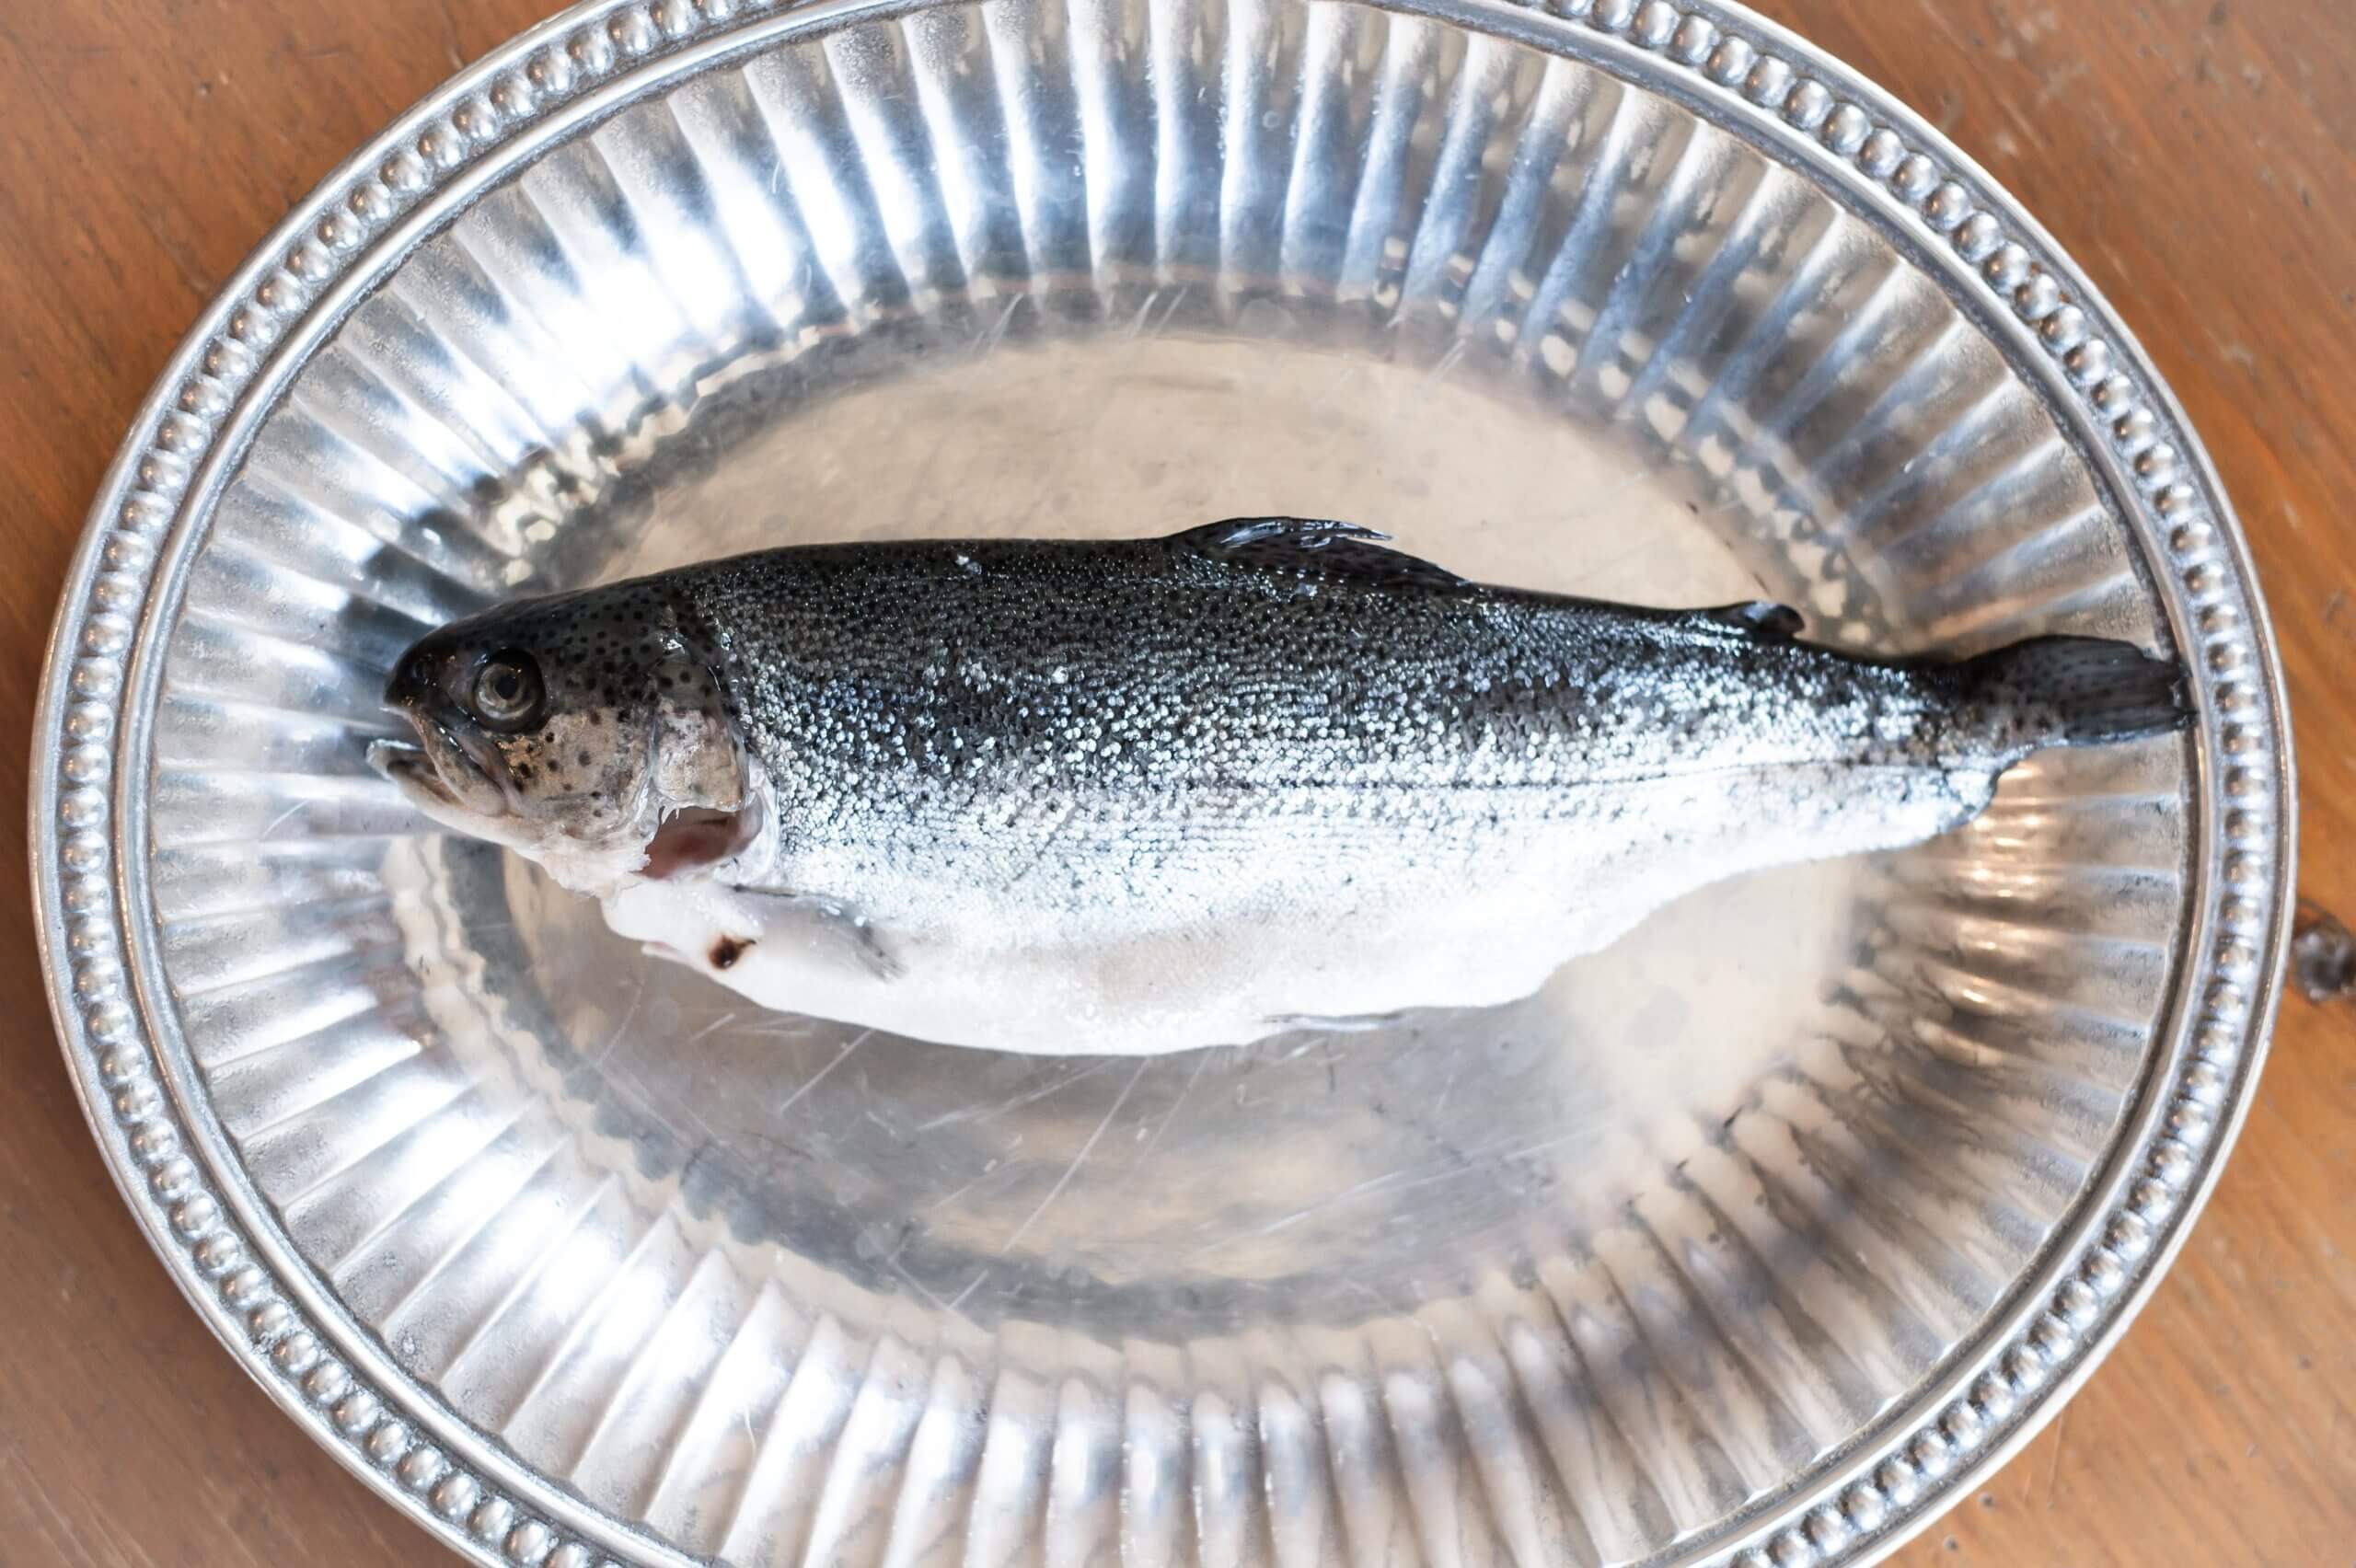 Color image of a dead trout on a pewter platter. The image is taken from above looking down on the twelve inch fish.